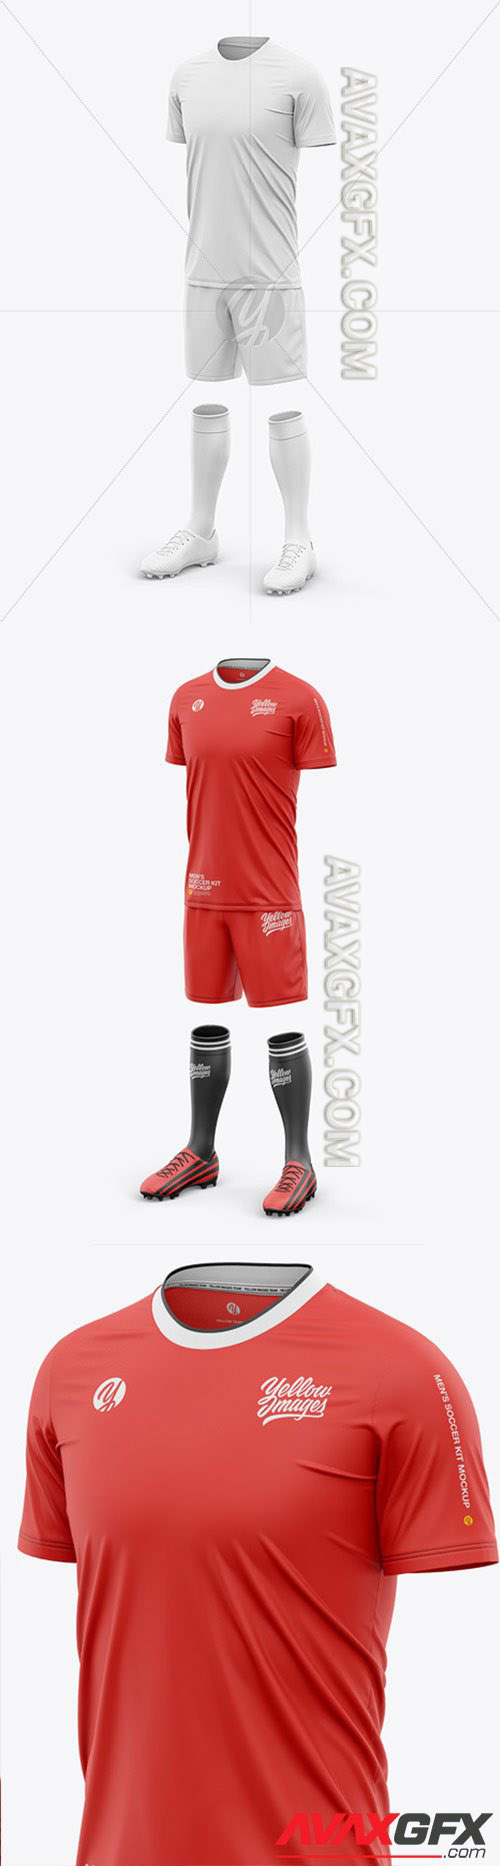 Download Men's Crew Neck Full Soccer Kit - Front Half-Side View 66331 » AVAXGFX - All Downloads that You ...